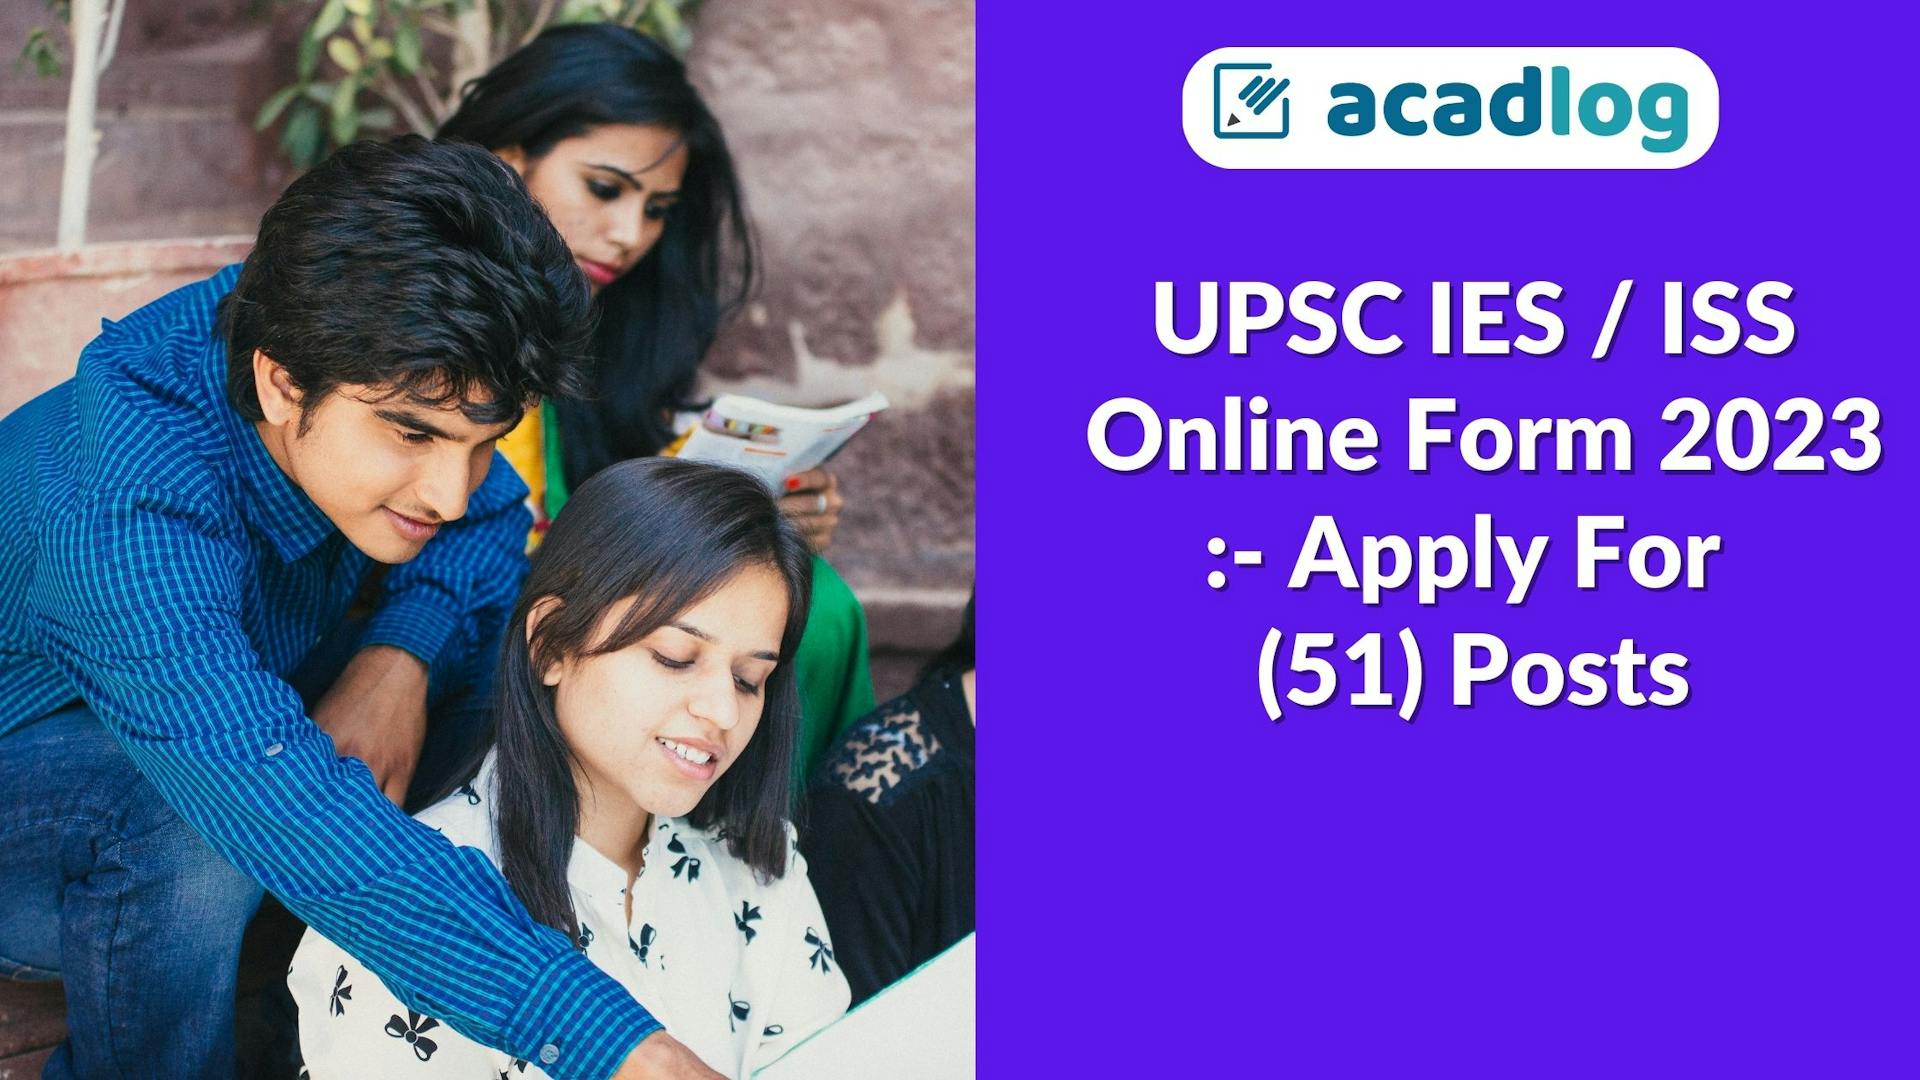 Acadlog: UPSC Indian Economic Service IES and Indian Statistical Service ISS Examination 2023 Apply Online for 51 Post